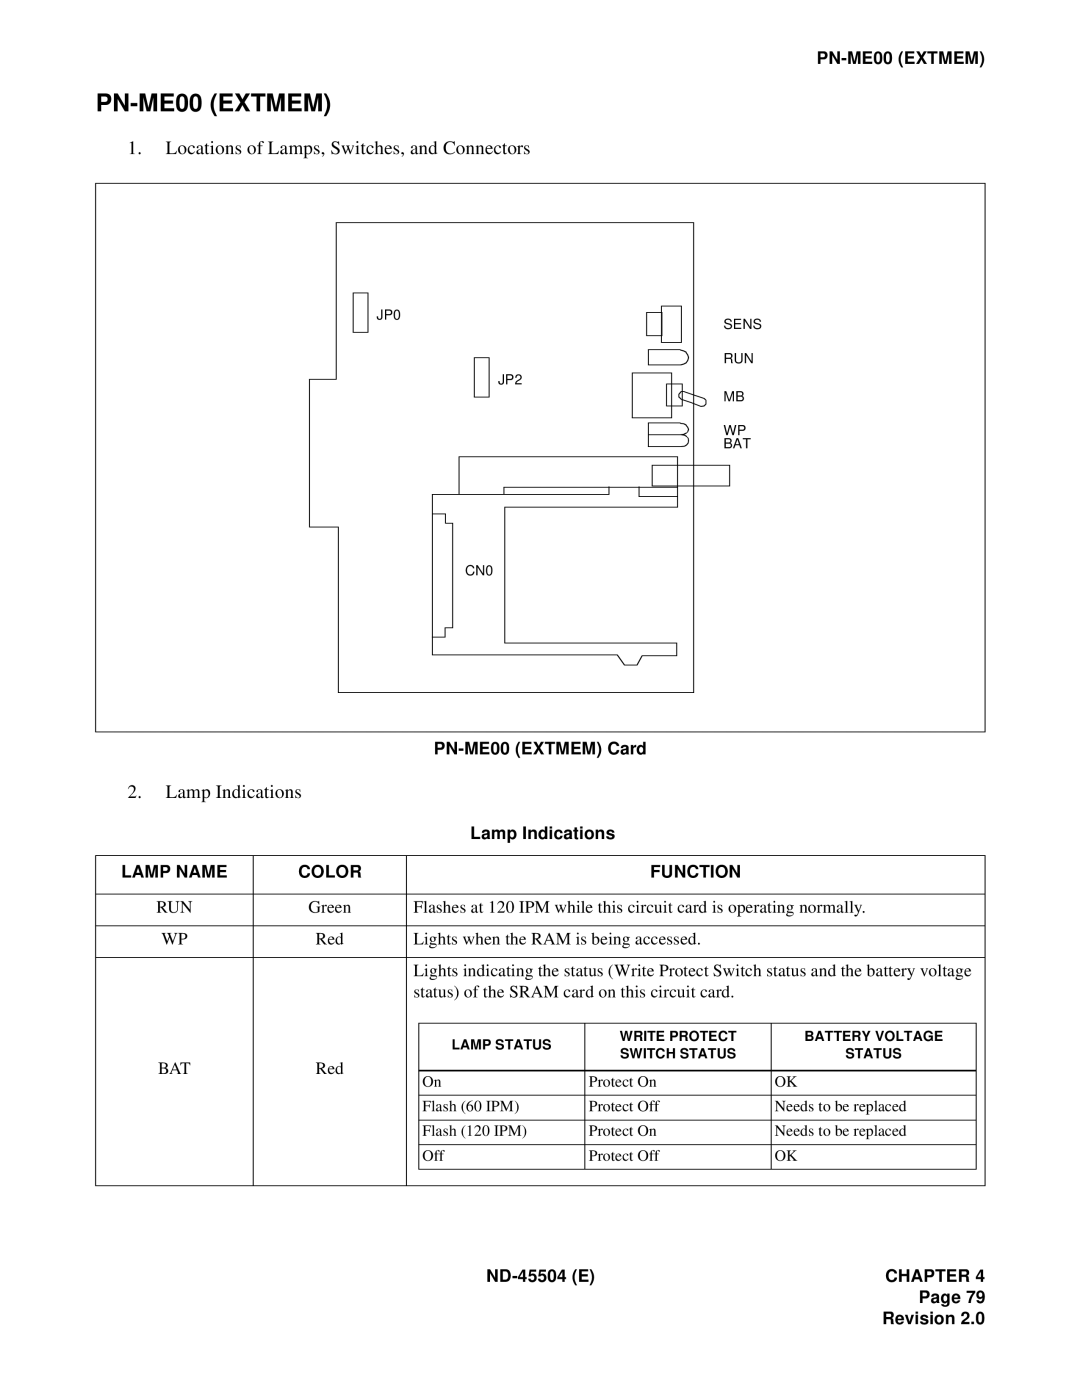 NEC 2000 IVS Locations of Lamps, Switches, and Connectors, Lamp Indications, PN-ME00EXTMEM Card, Lamp Name, Color 